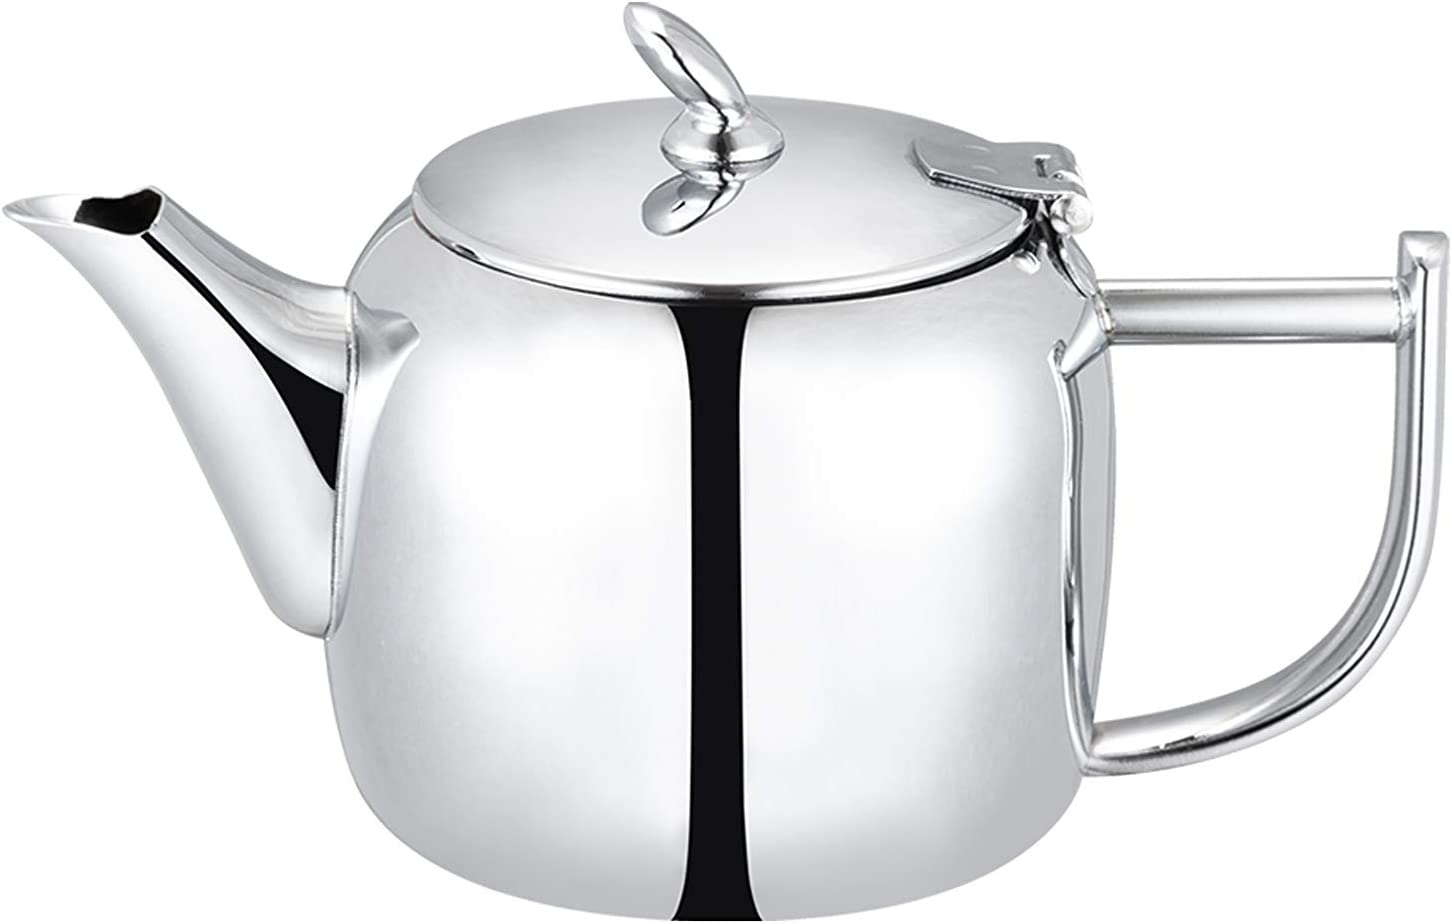 Cafe Ole Café Olé CHT-018 Chatsworth Teapot with Unique Lid Made of High Quality Stainless Steel 18/10 - High Polish 18oz Non Drip Casting Stainless Steel 18 Ounces